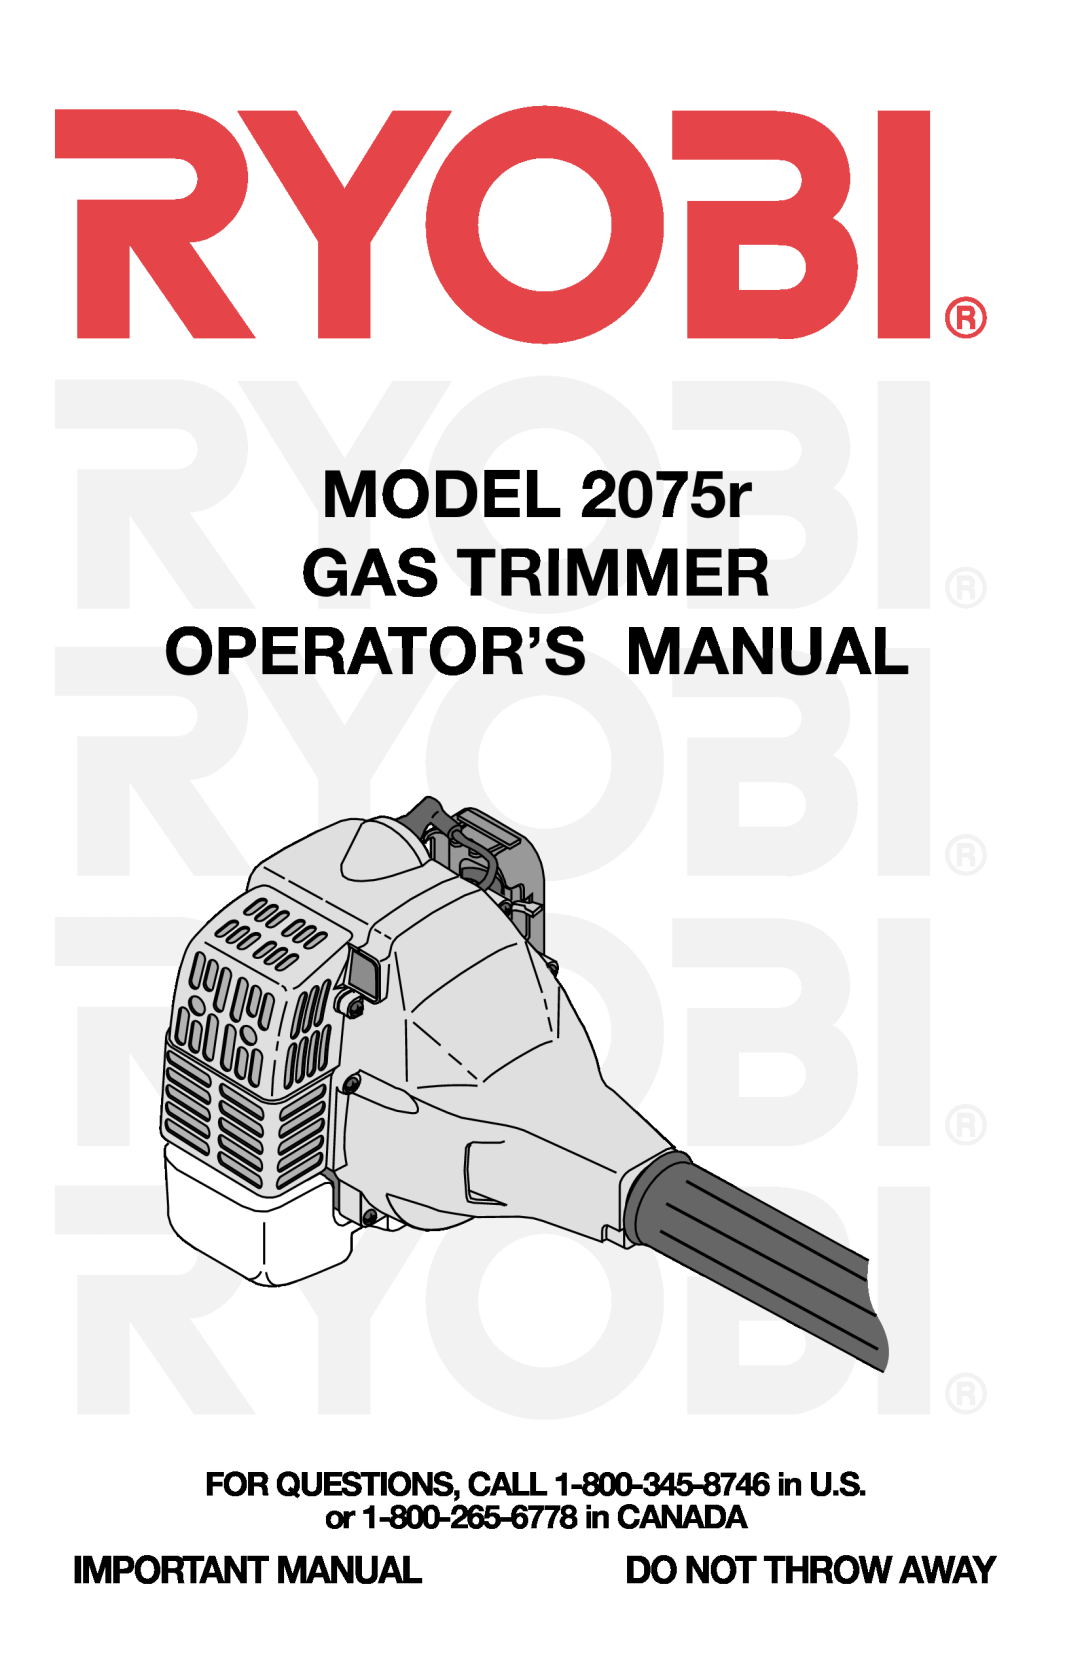 Ryobi 2075r manual Important Manual, FOR QUESTIONS, CALL 1-800-345-8746 in U.S or 1-800-265-6778 in CANADA 